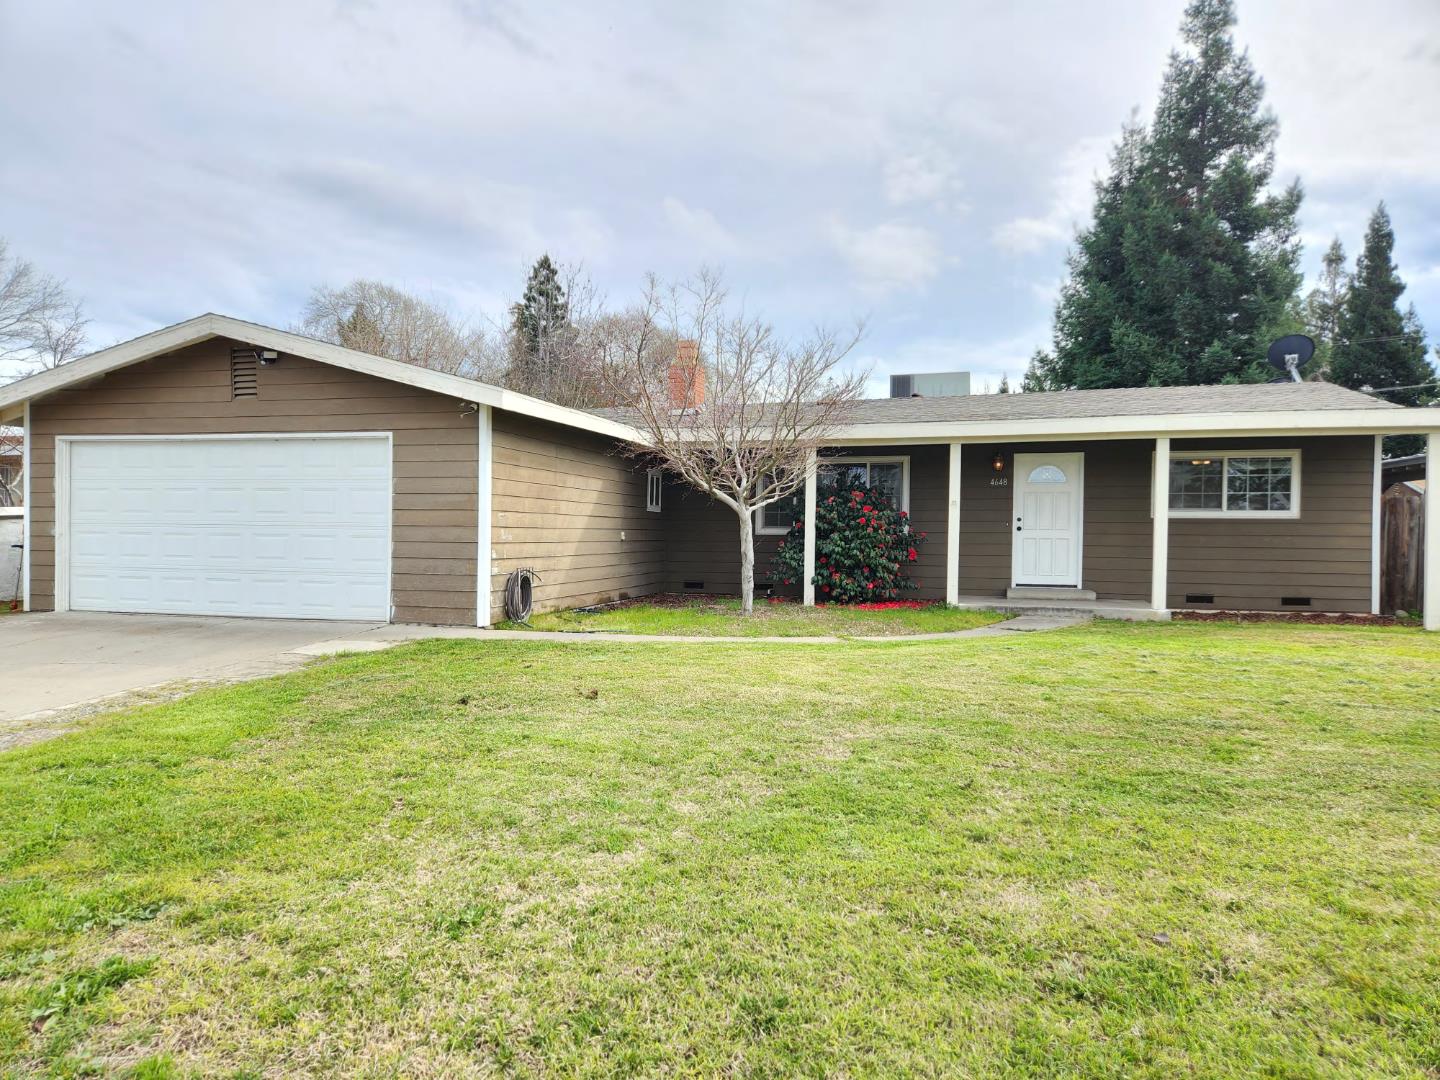 Photo of 4648 Eastview Dr in Stockton, CA